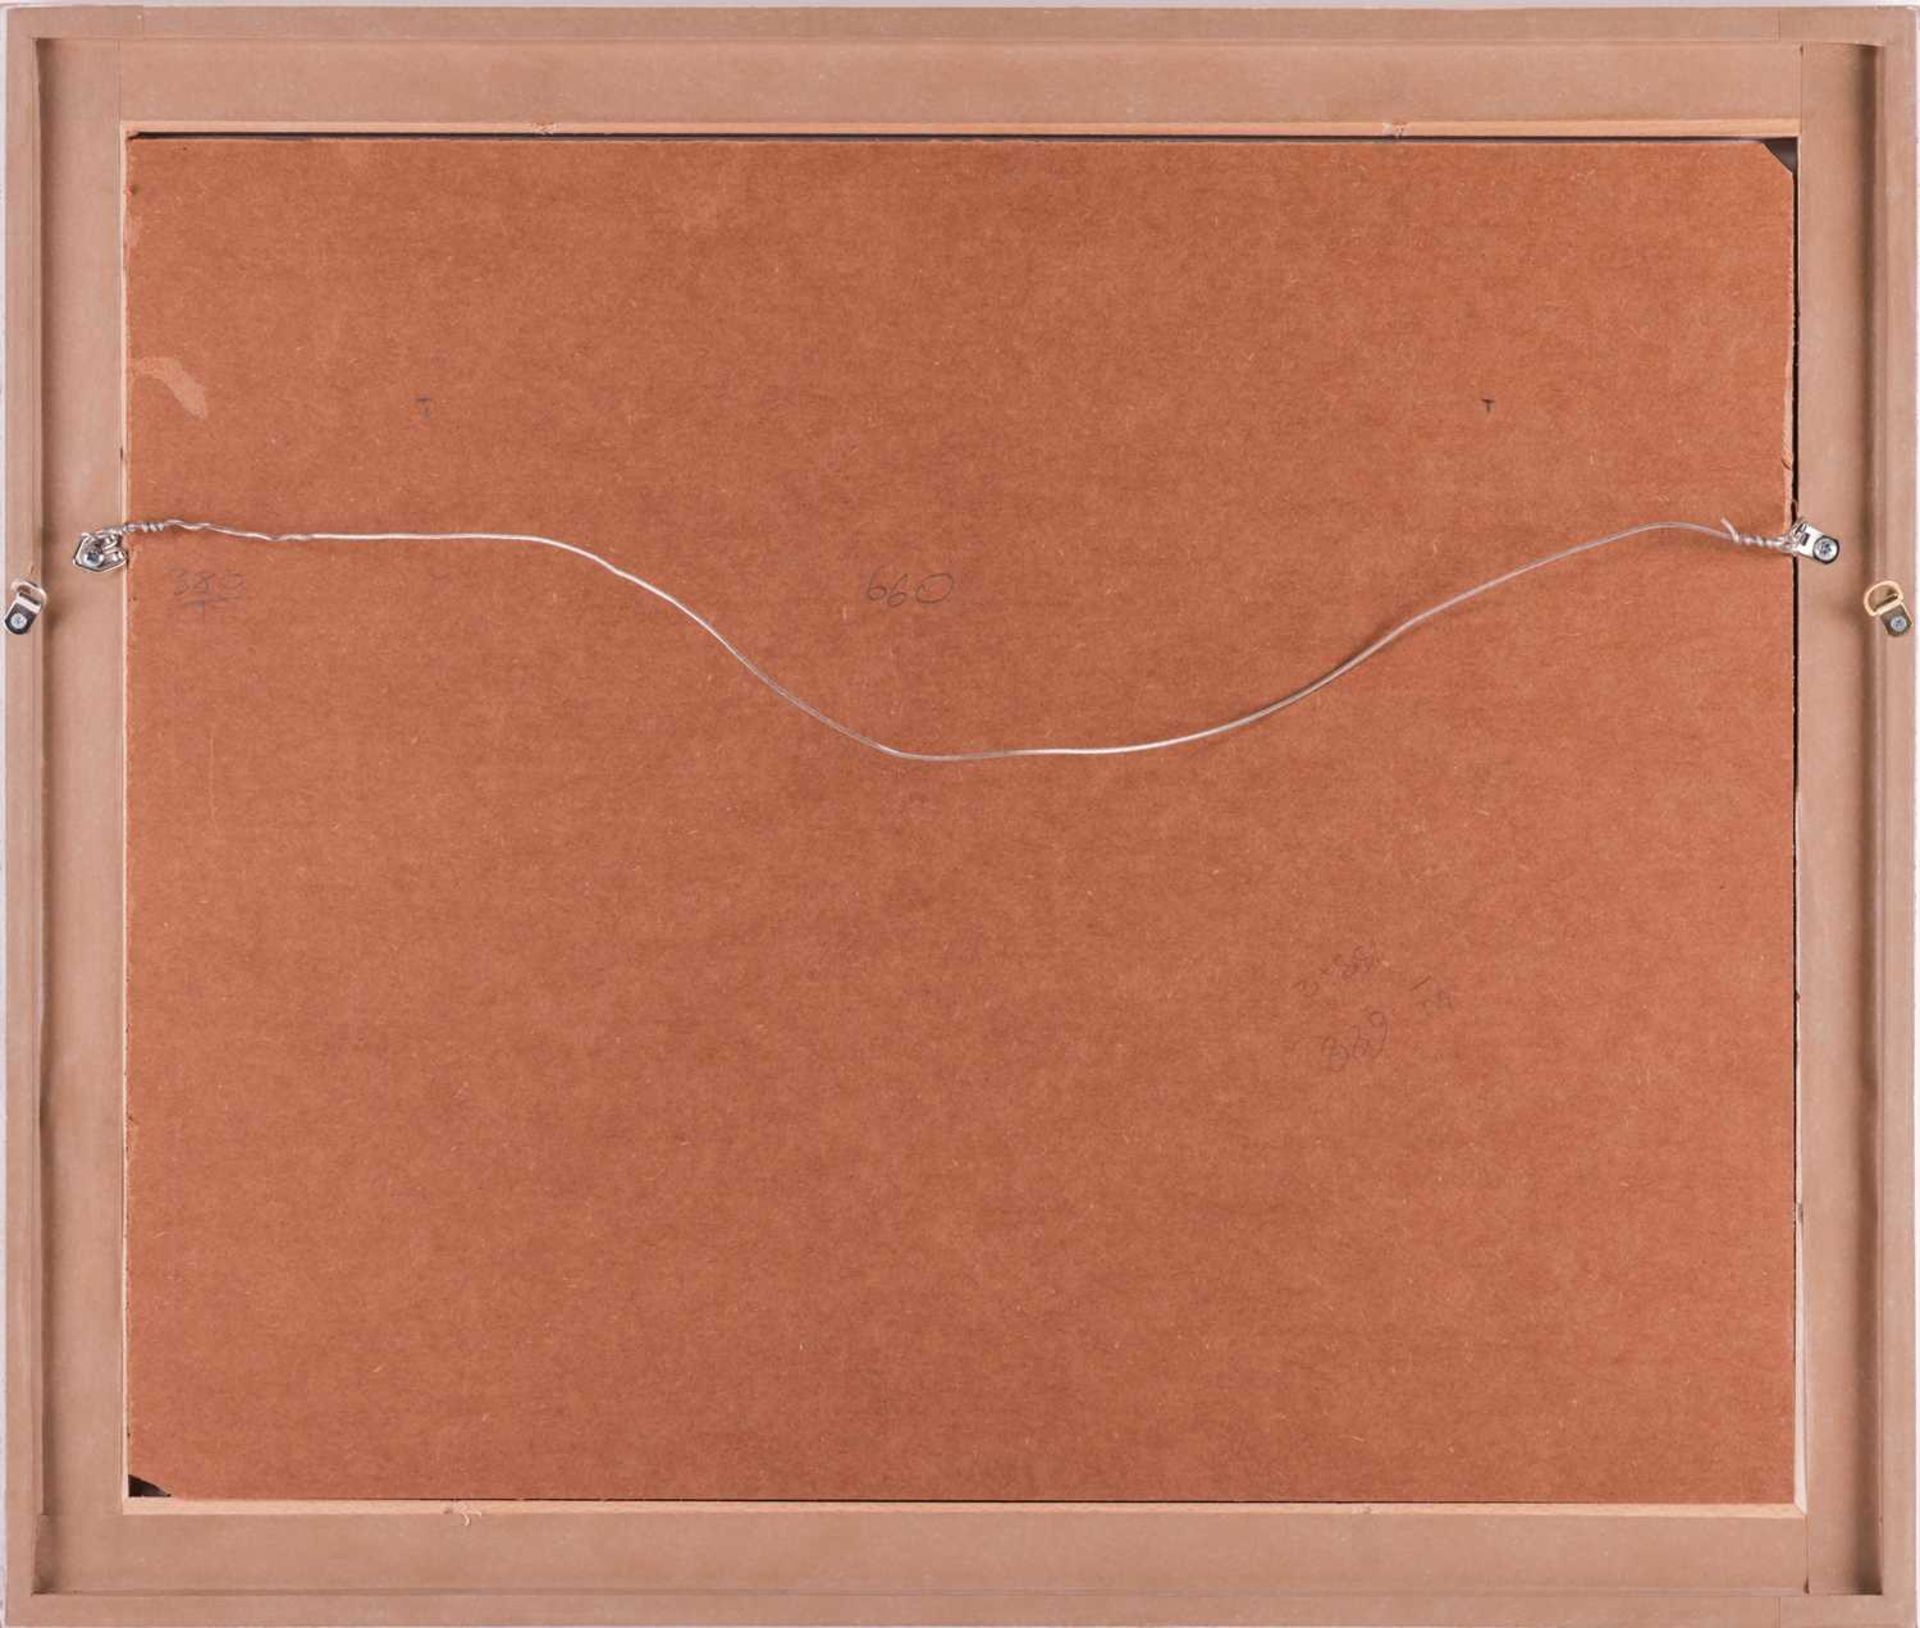 R.S. (American, Contemporary) Tennis Player, titled in Pencil 'West Chop July 2006', initialled RS a - Image 7 of 7